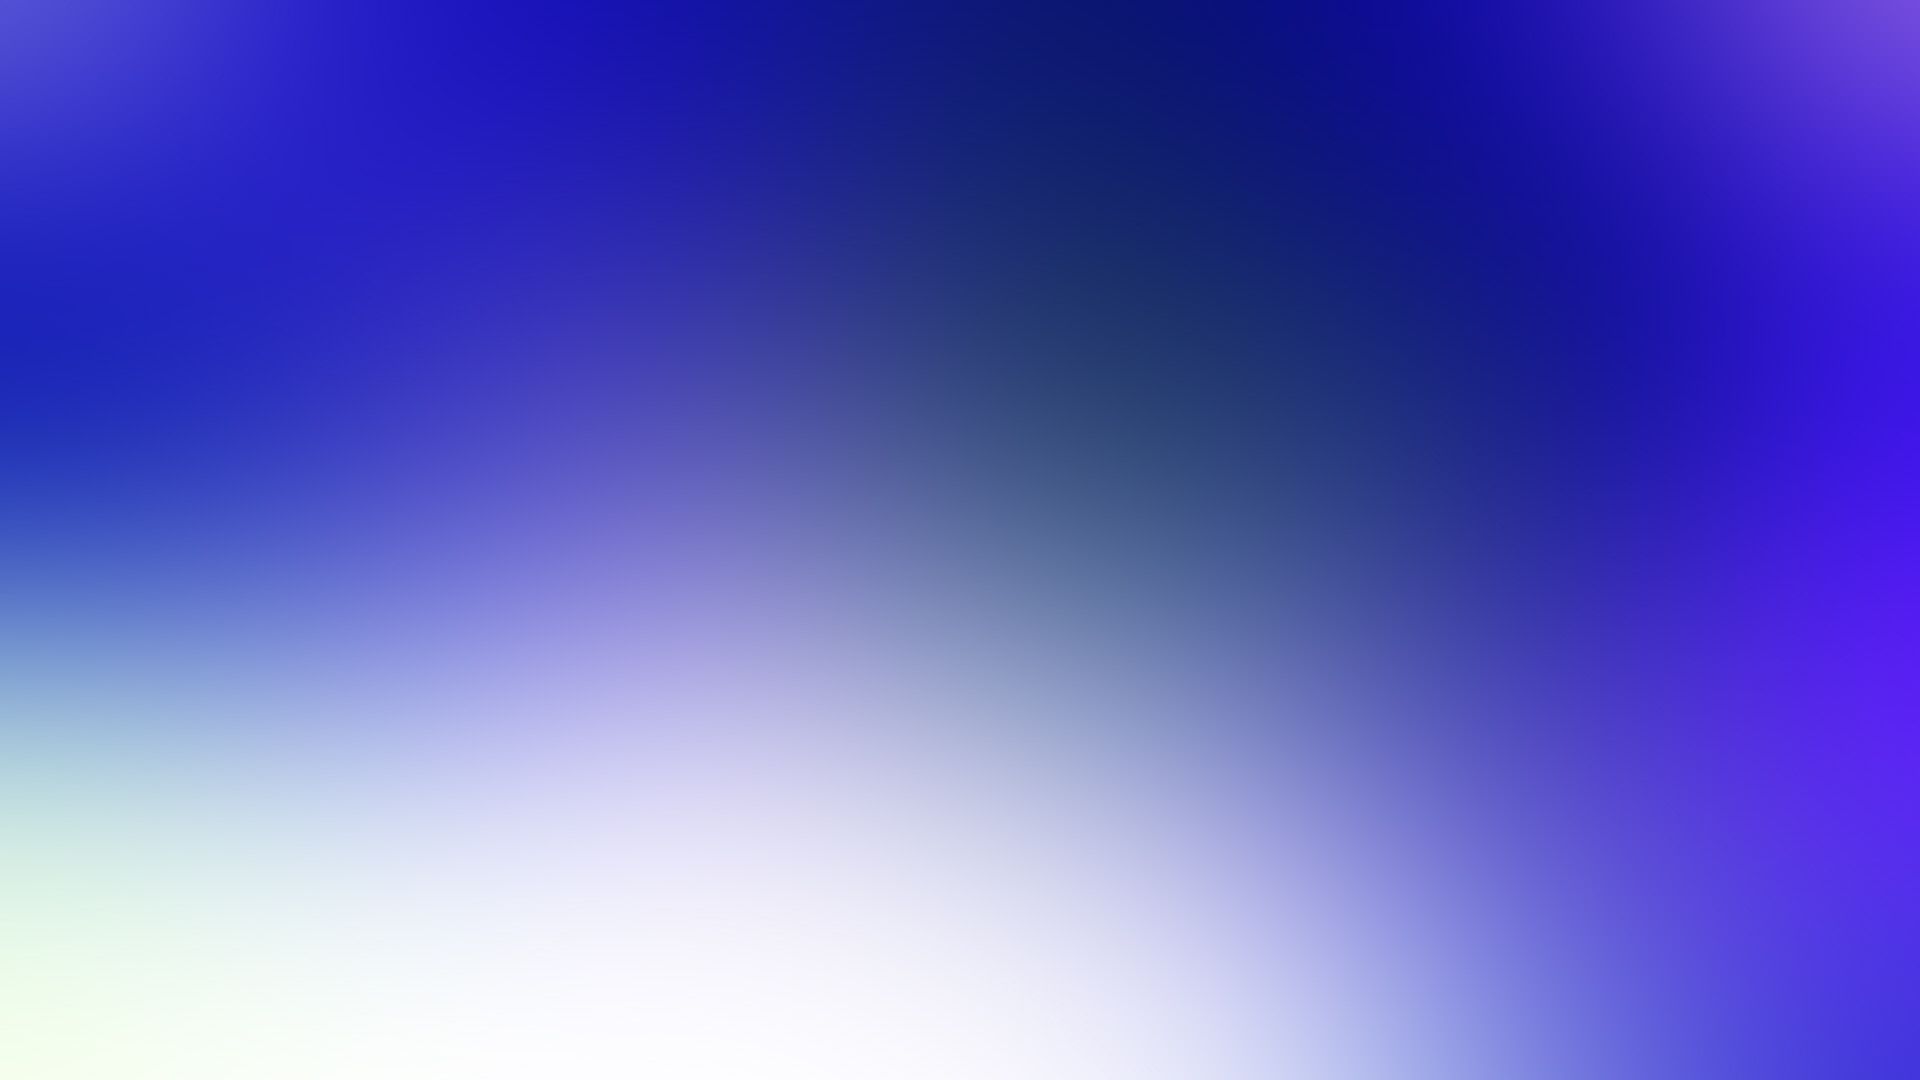 Download Wallpaper 1920x1080 Blue, White, Spots, Abstraction Full